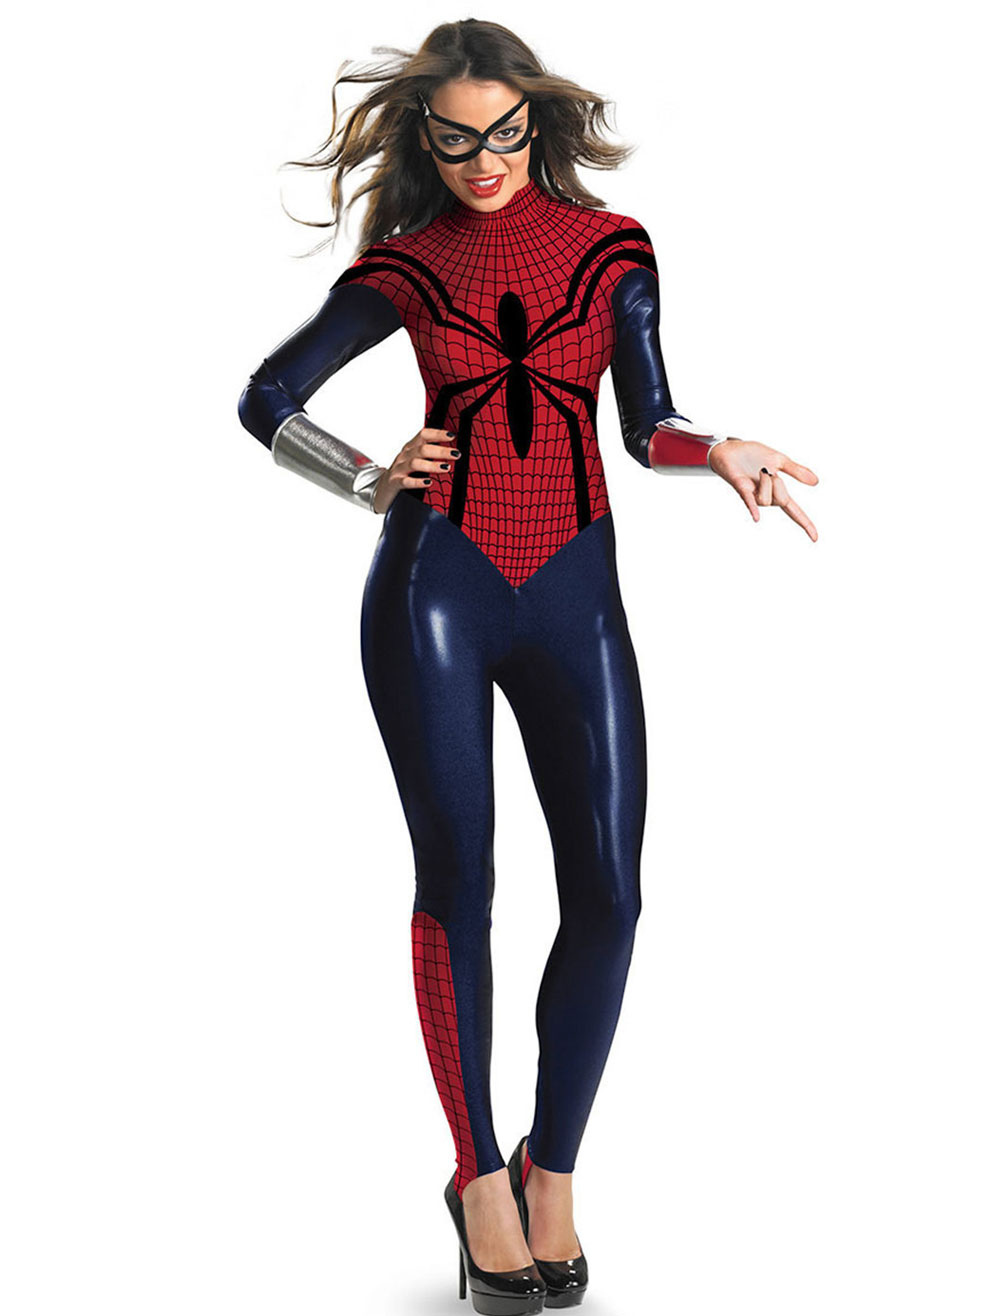 Women Spiderman Costume Halloween Jumpsuits Outfit - Costumeslive.com